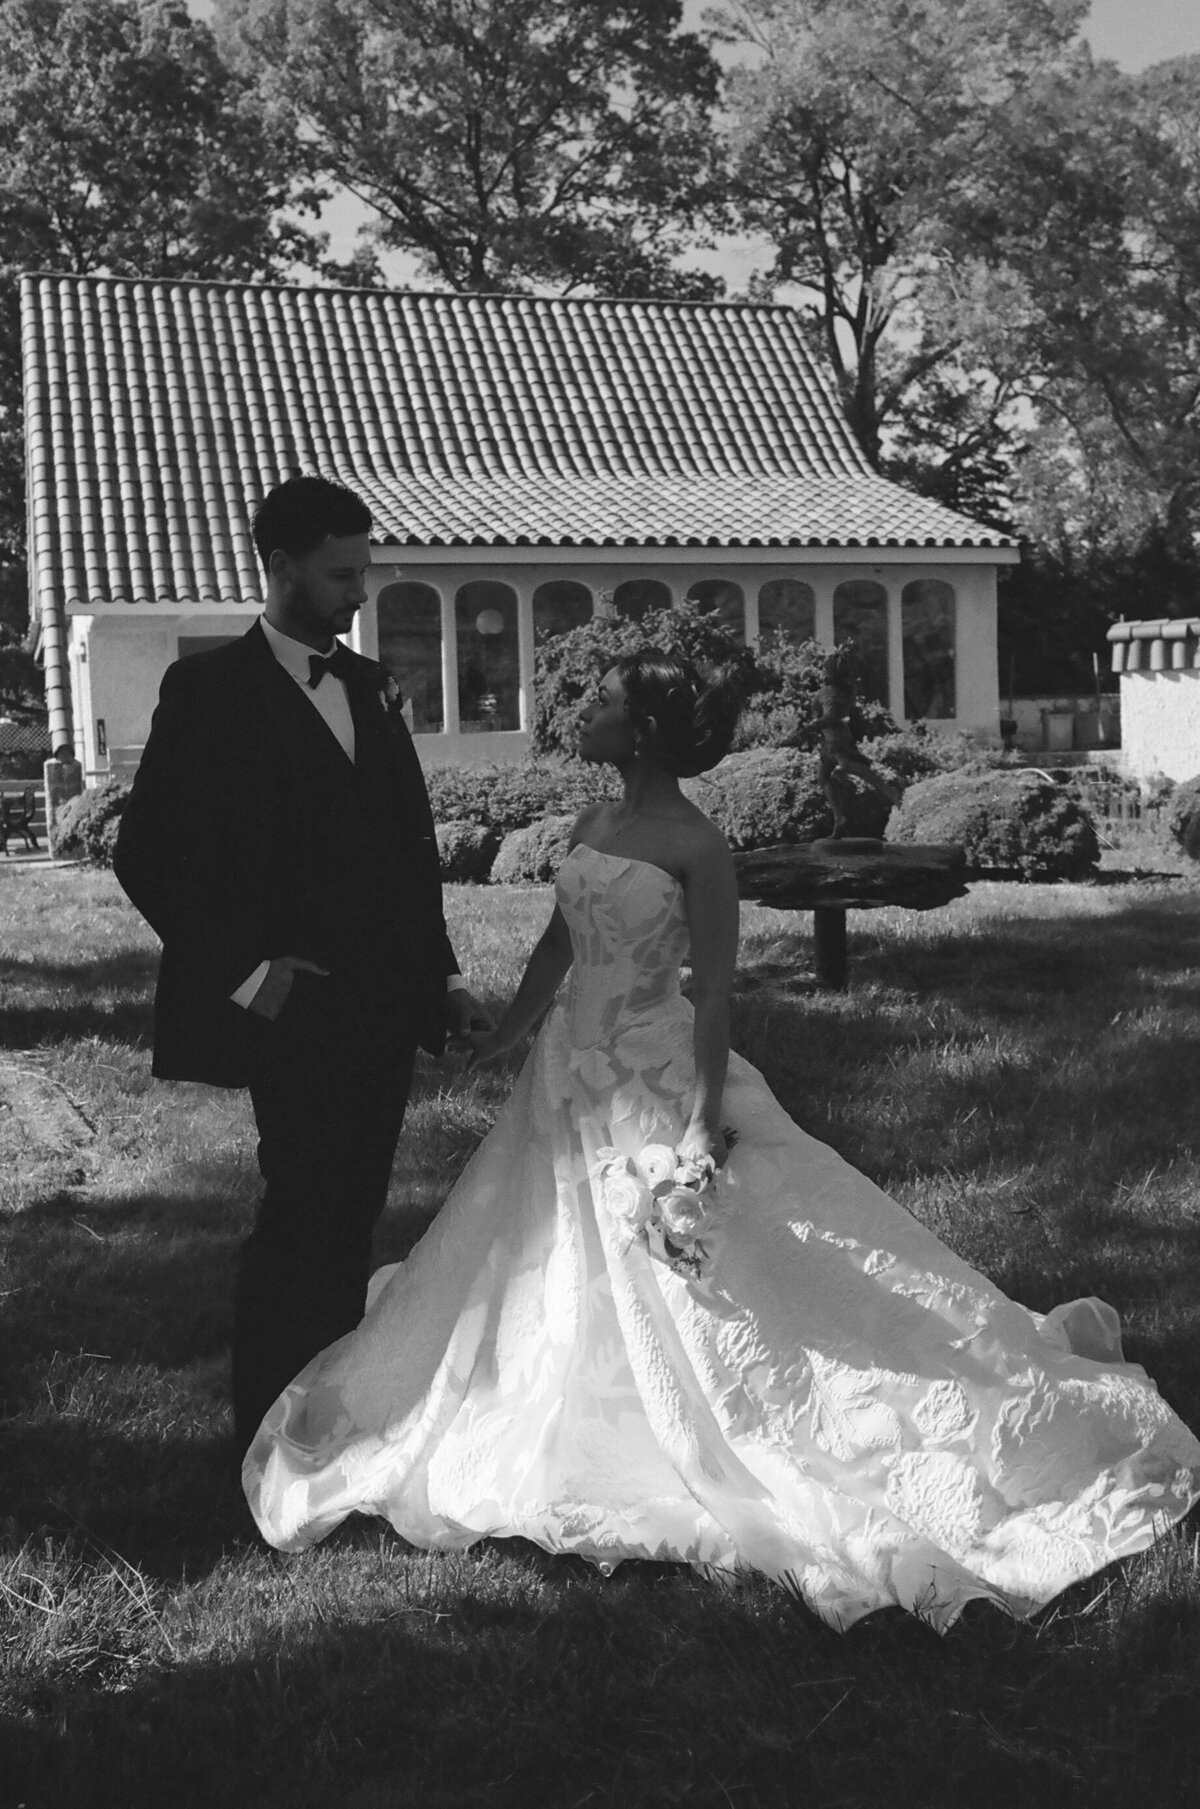 35mm film scan of bride and groom